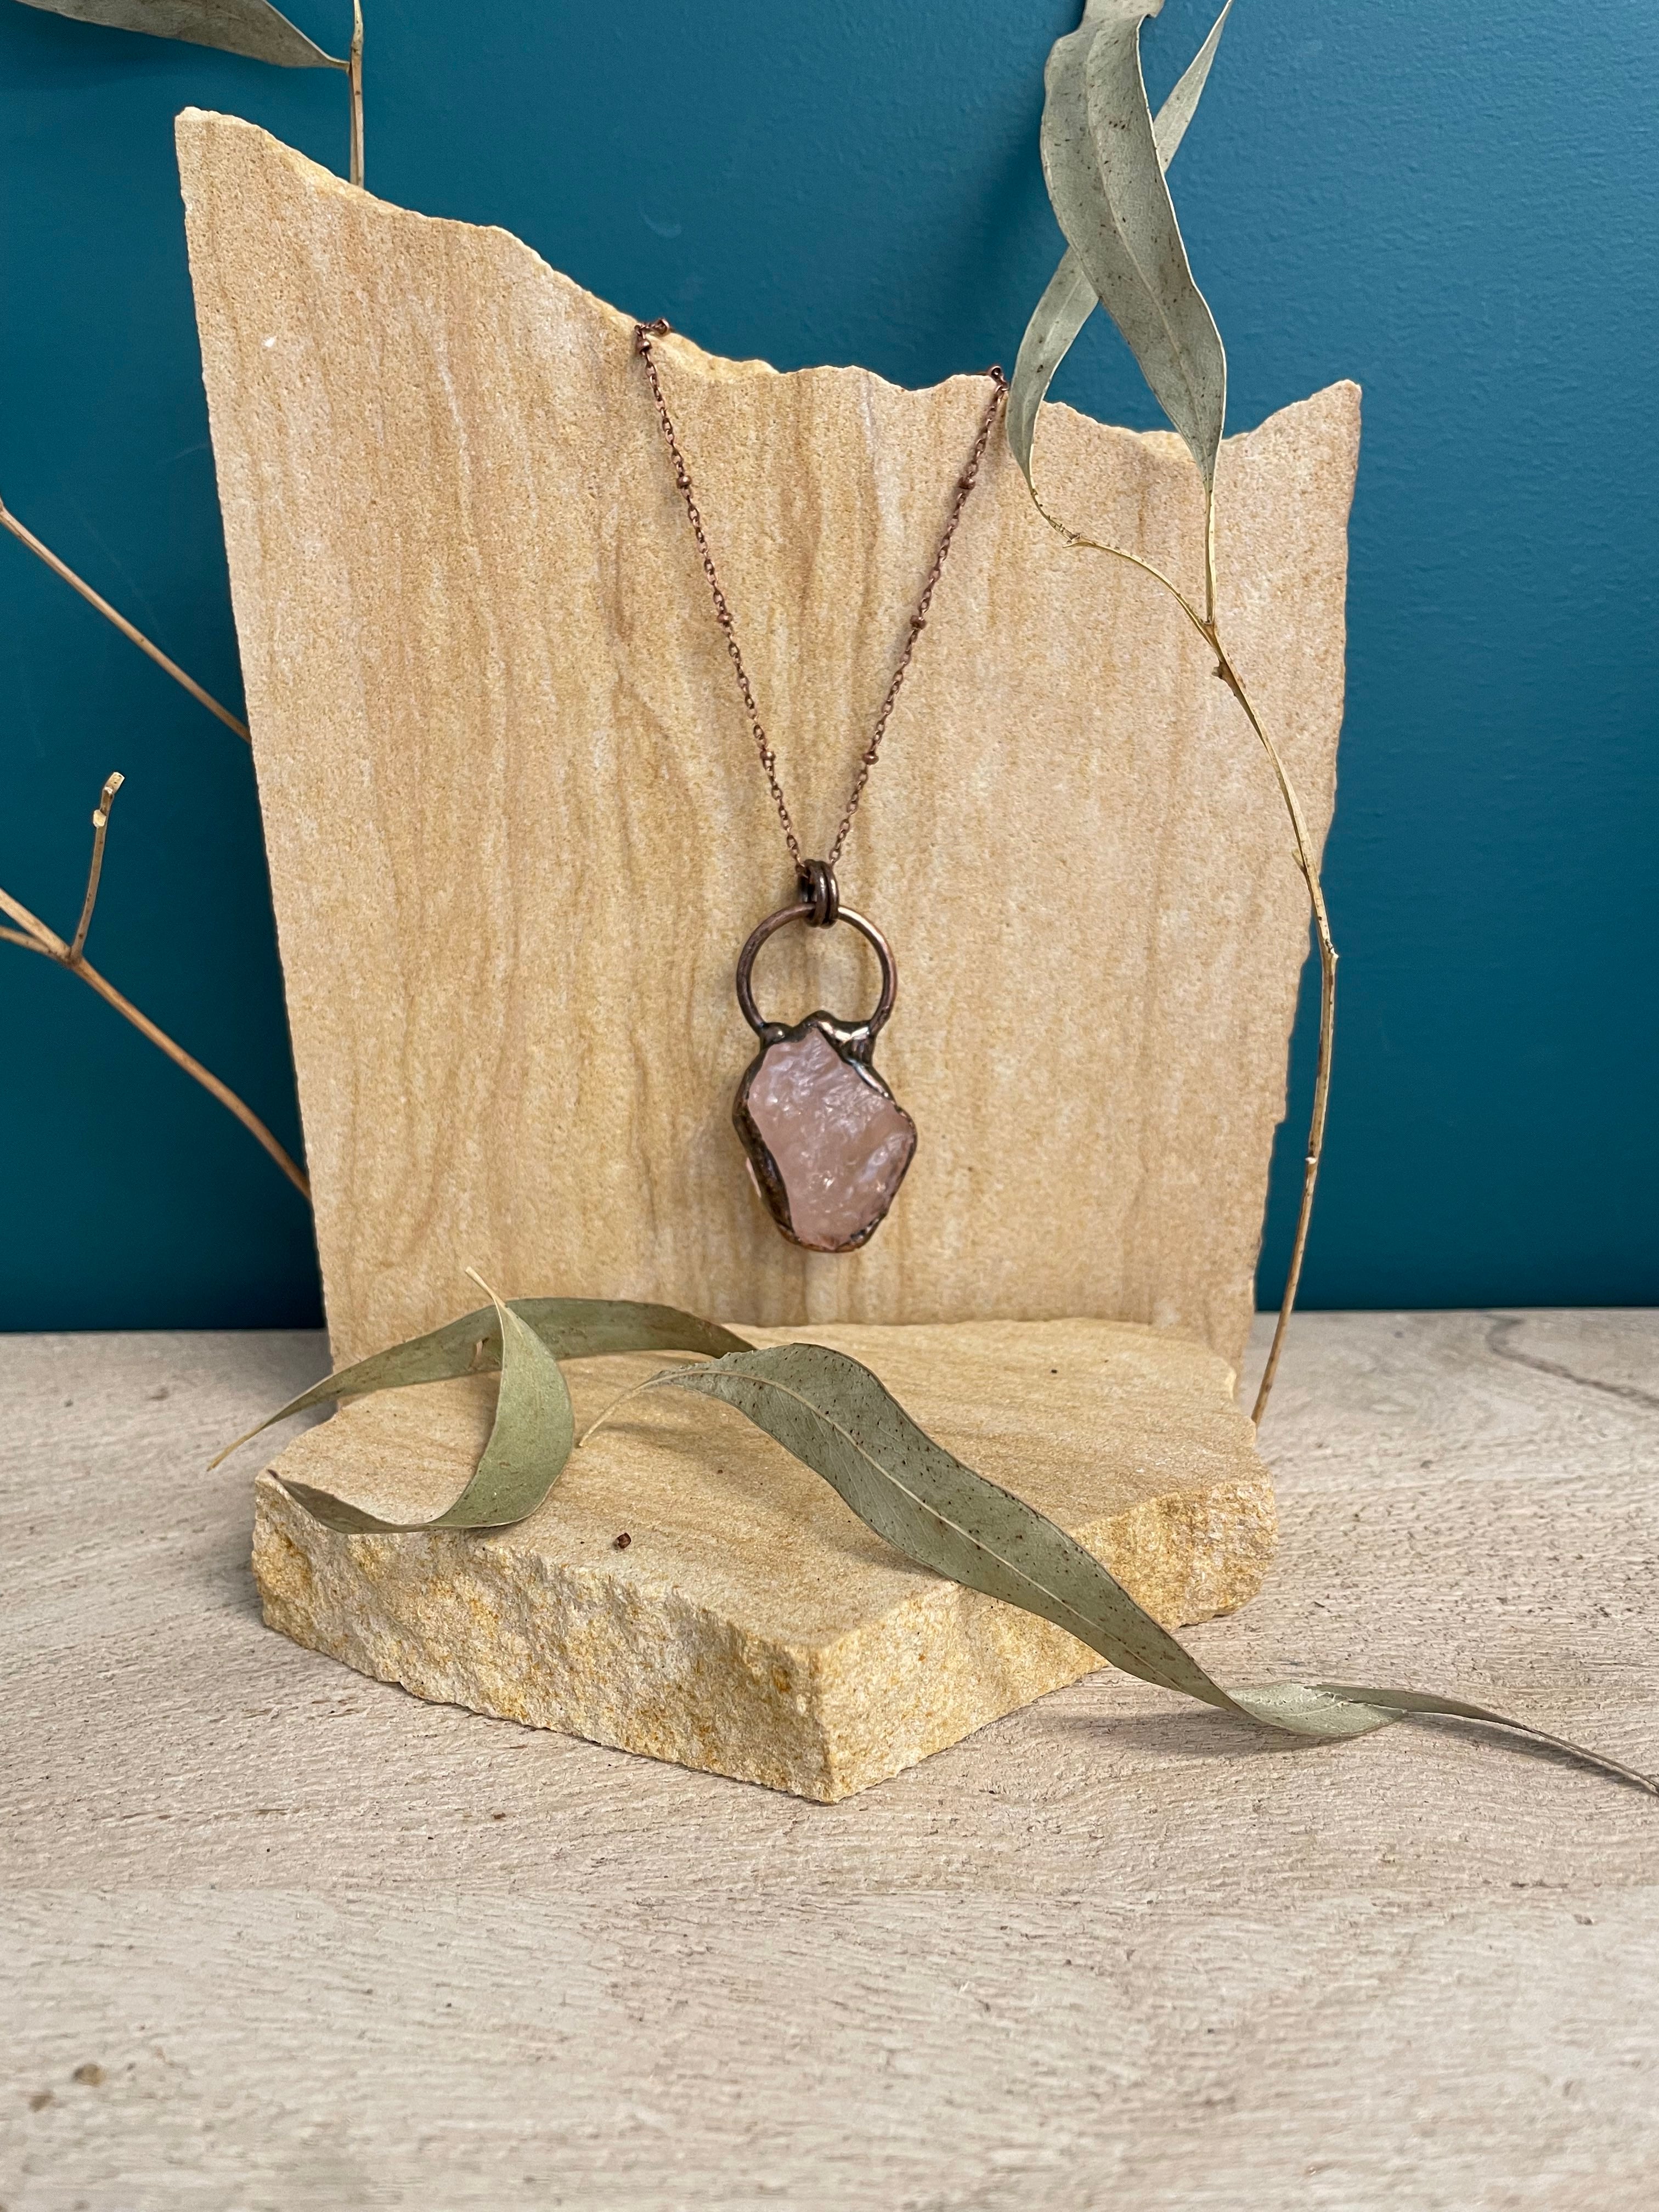 Whole Store Raw Rose Quartz Antique Rose Gold Plated Ring Pendant Necklace